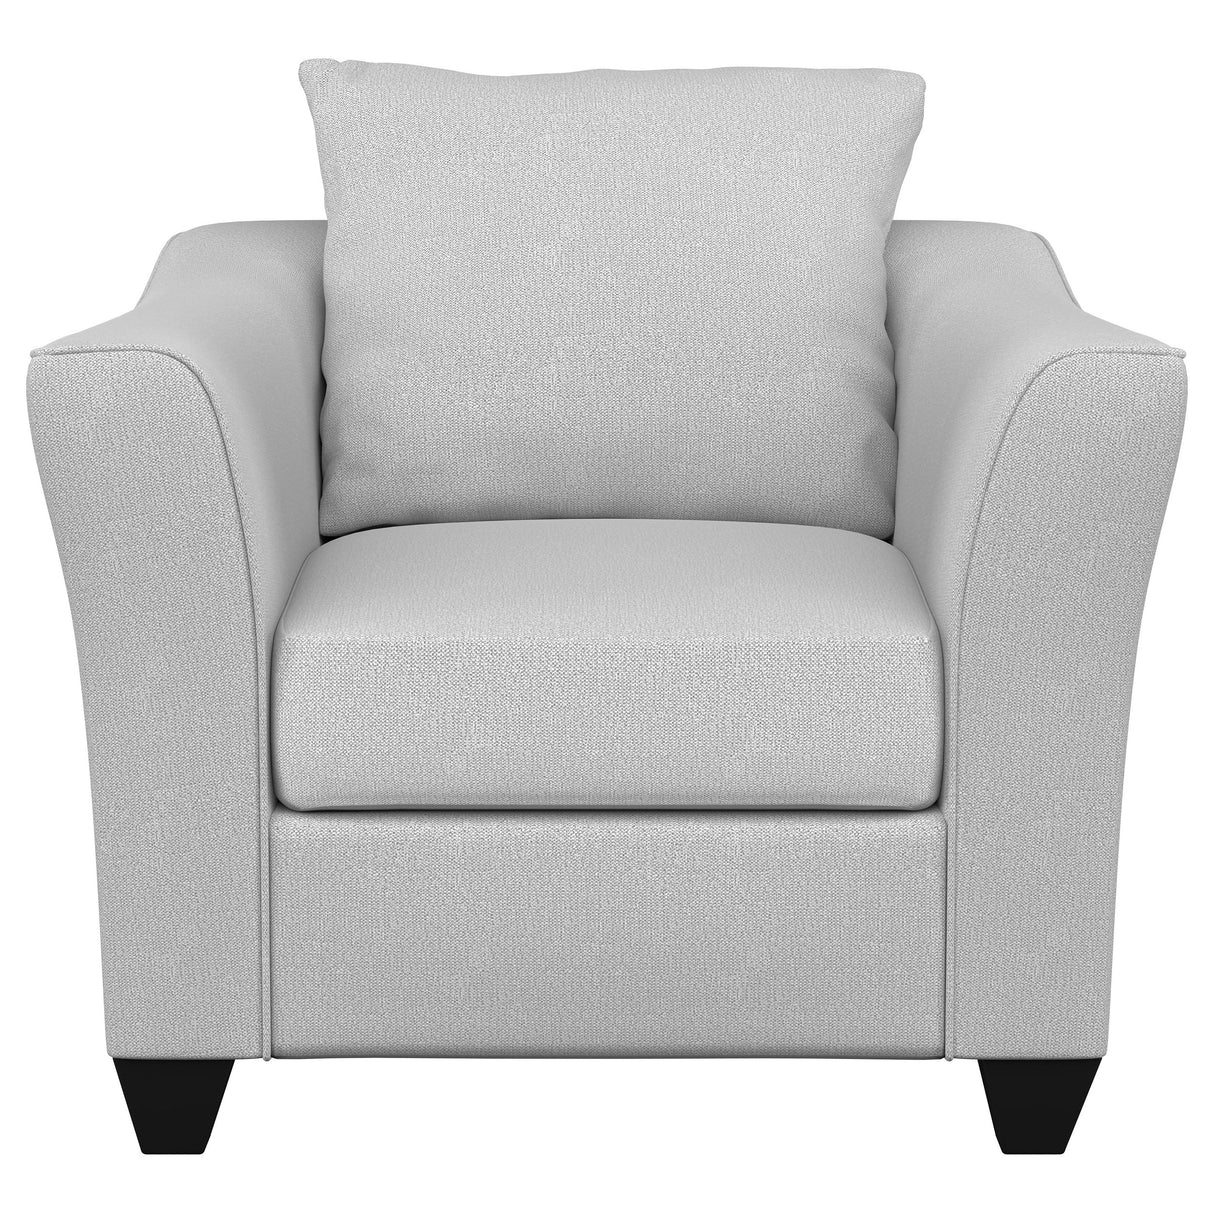 Chair - Salizar Upholstered Track Arm Fabric Accent Chair Grey Mist